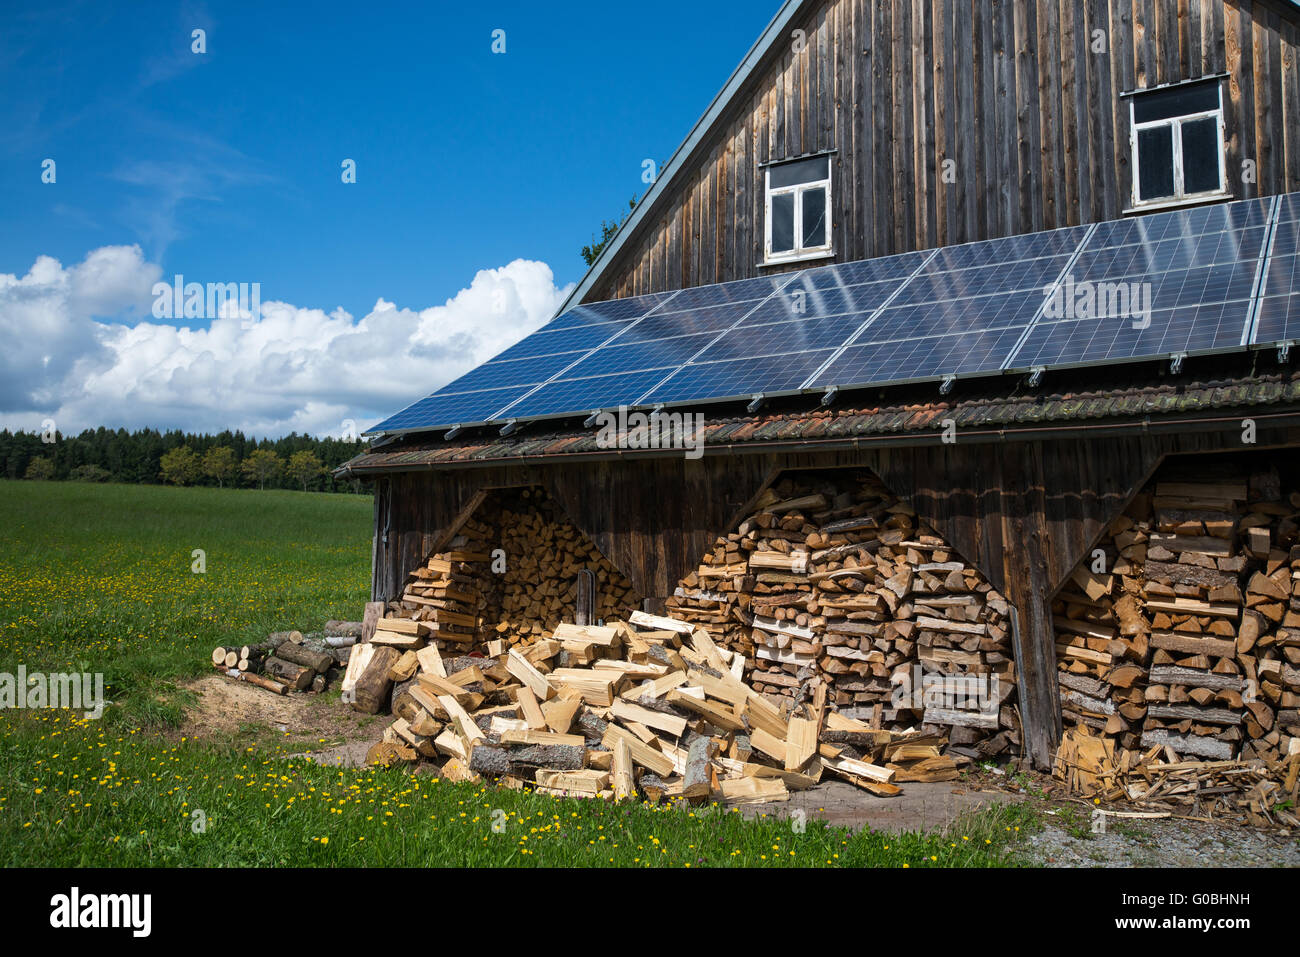 solar panels and fire wood at barn Stock Photo